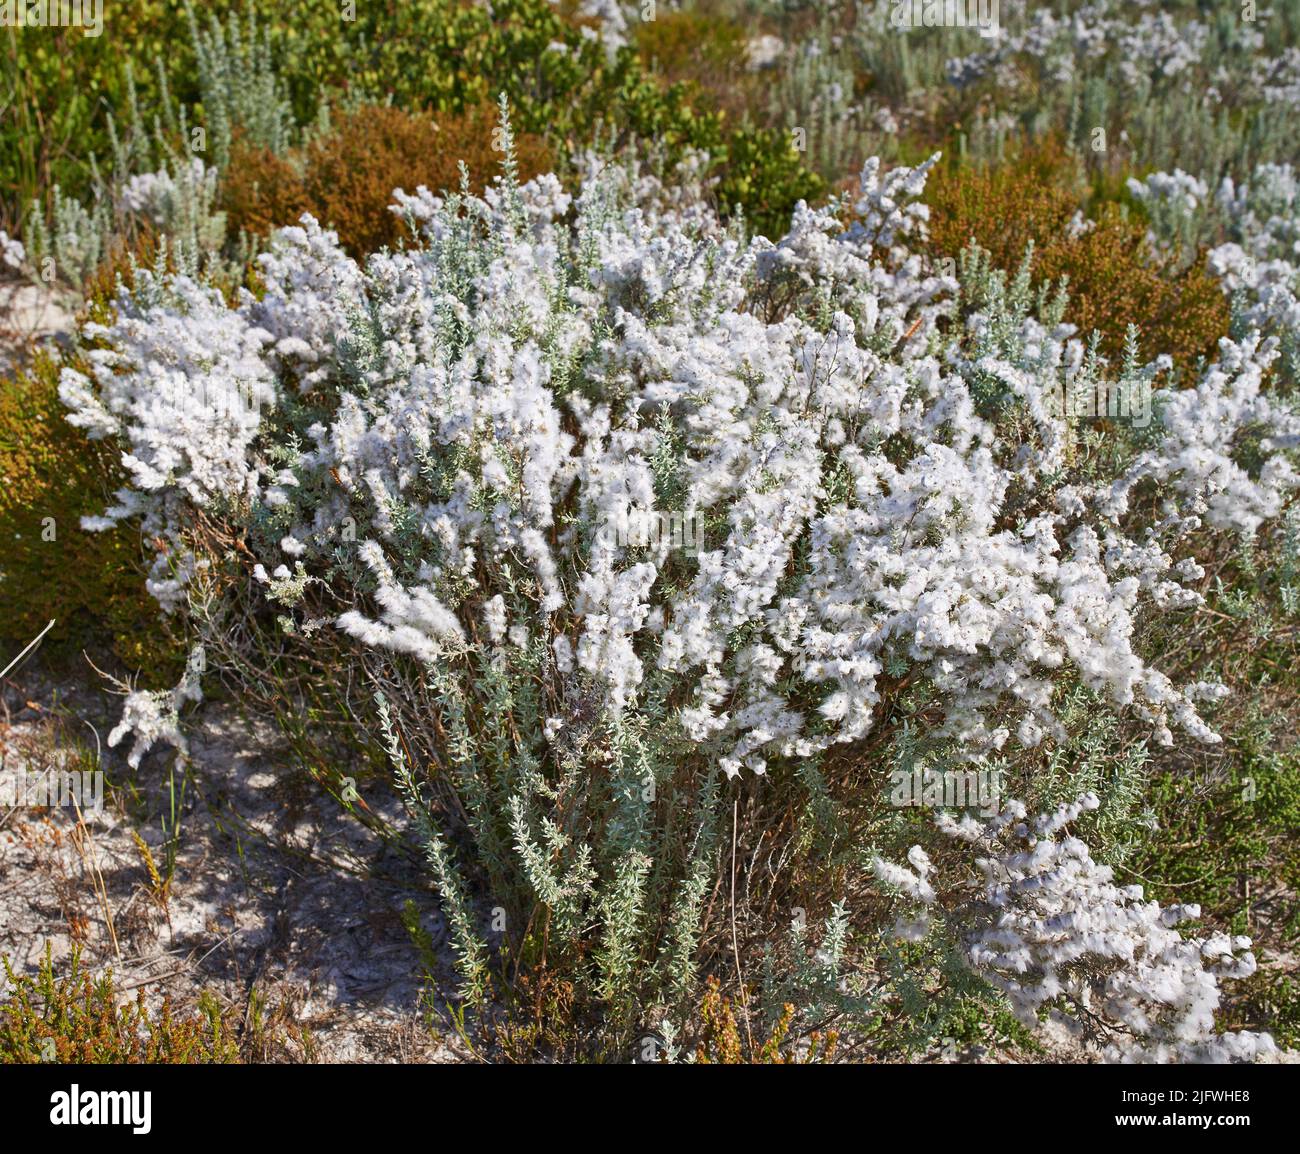 White flowering bush with other fynbos on a sandy field in a South African national park. Scenic landscape environment of plants with shrub and Stock Photo